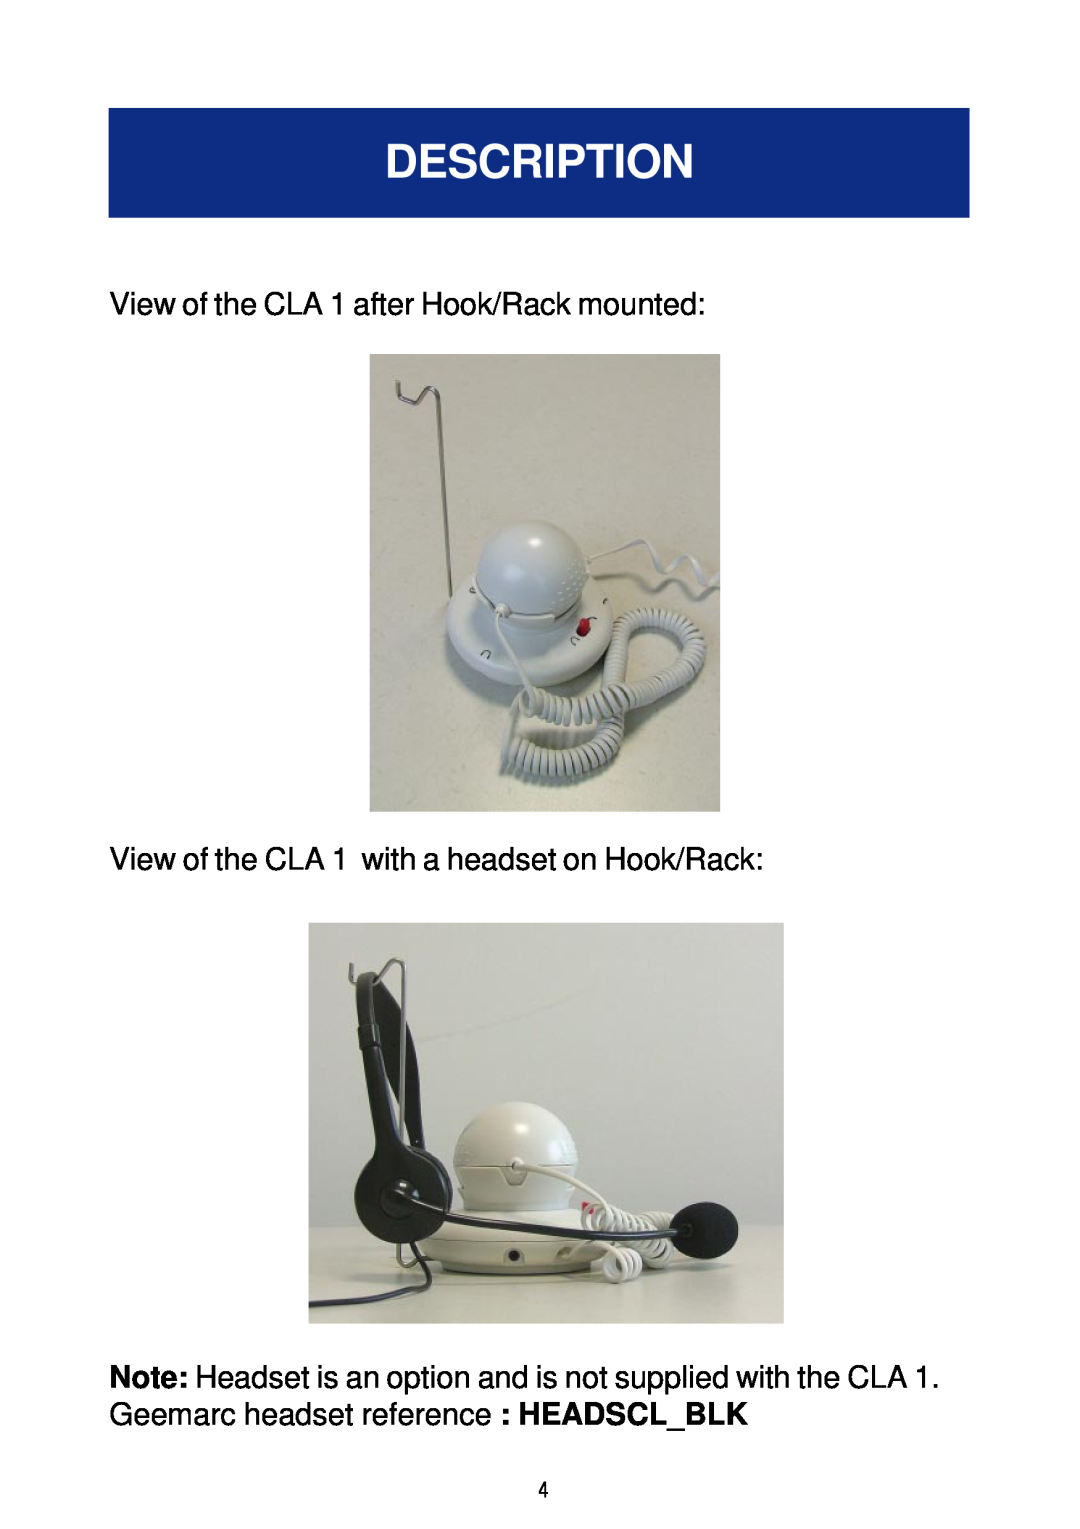 Geemarc manual Description, View of the CLA 1 after Hook/Rack mounted, View of the CLA 1 with a headset on Hook/Rack 